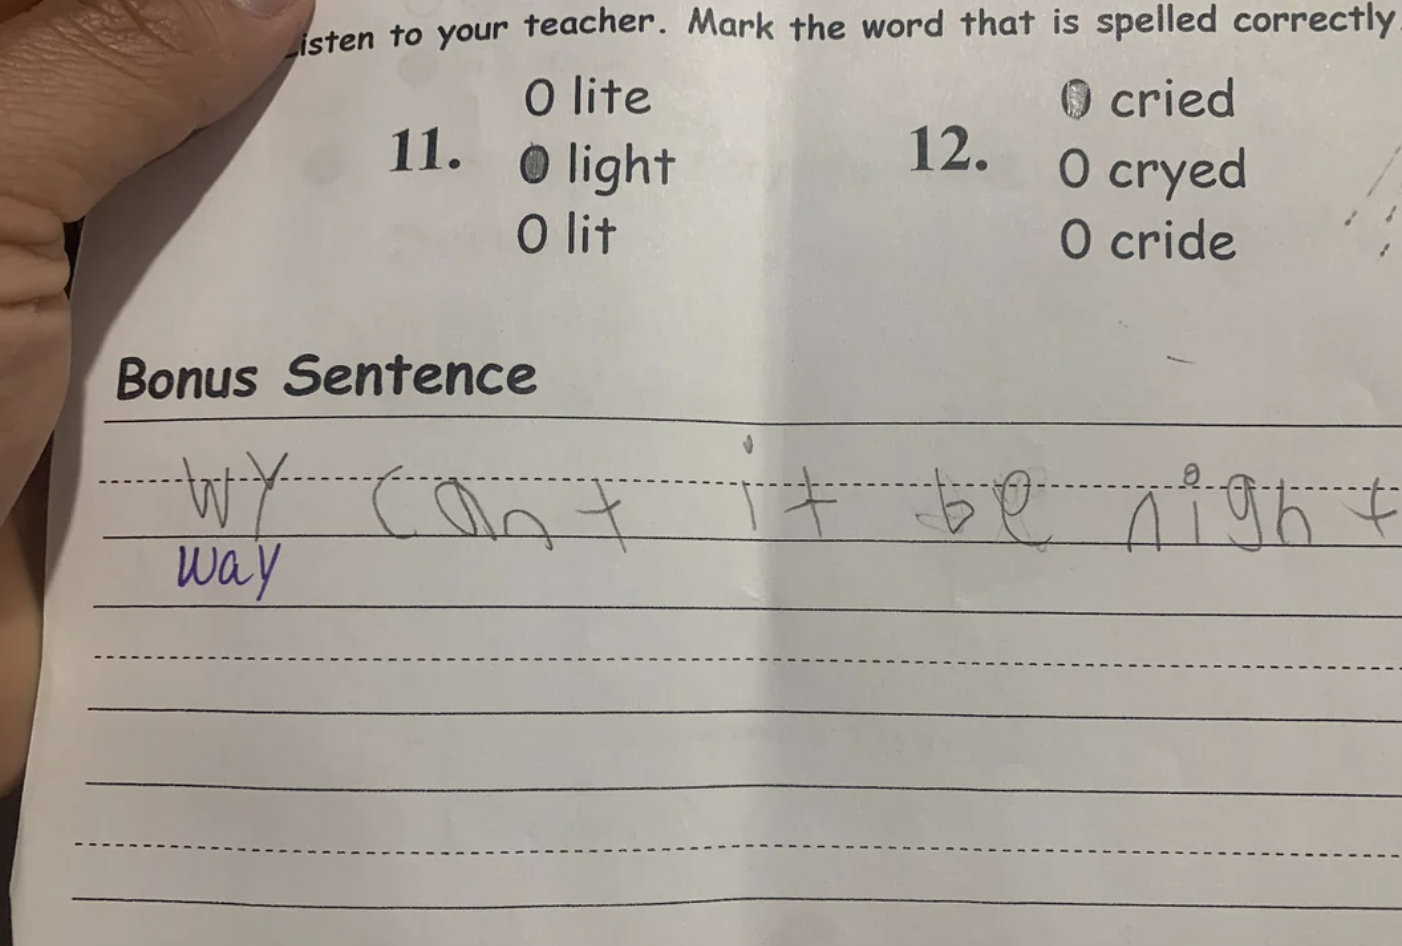 document - isten to your teacher. Mark the word that is spelled correctly O lite 11. Olight O cried 12. O cryed O cride Bonus Sentence O lit Wy can't it be night Way